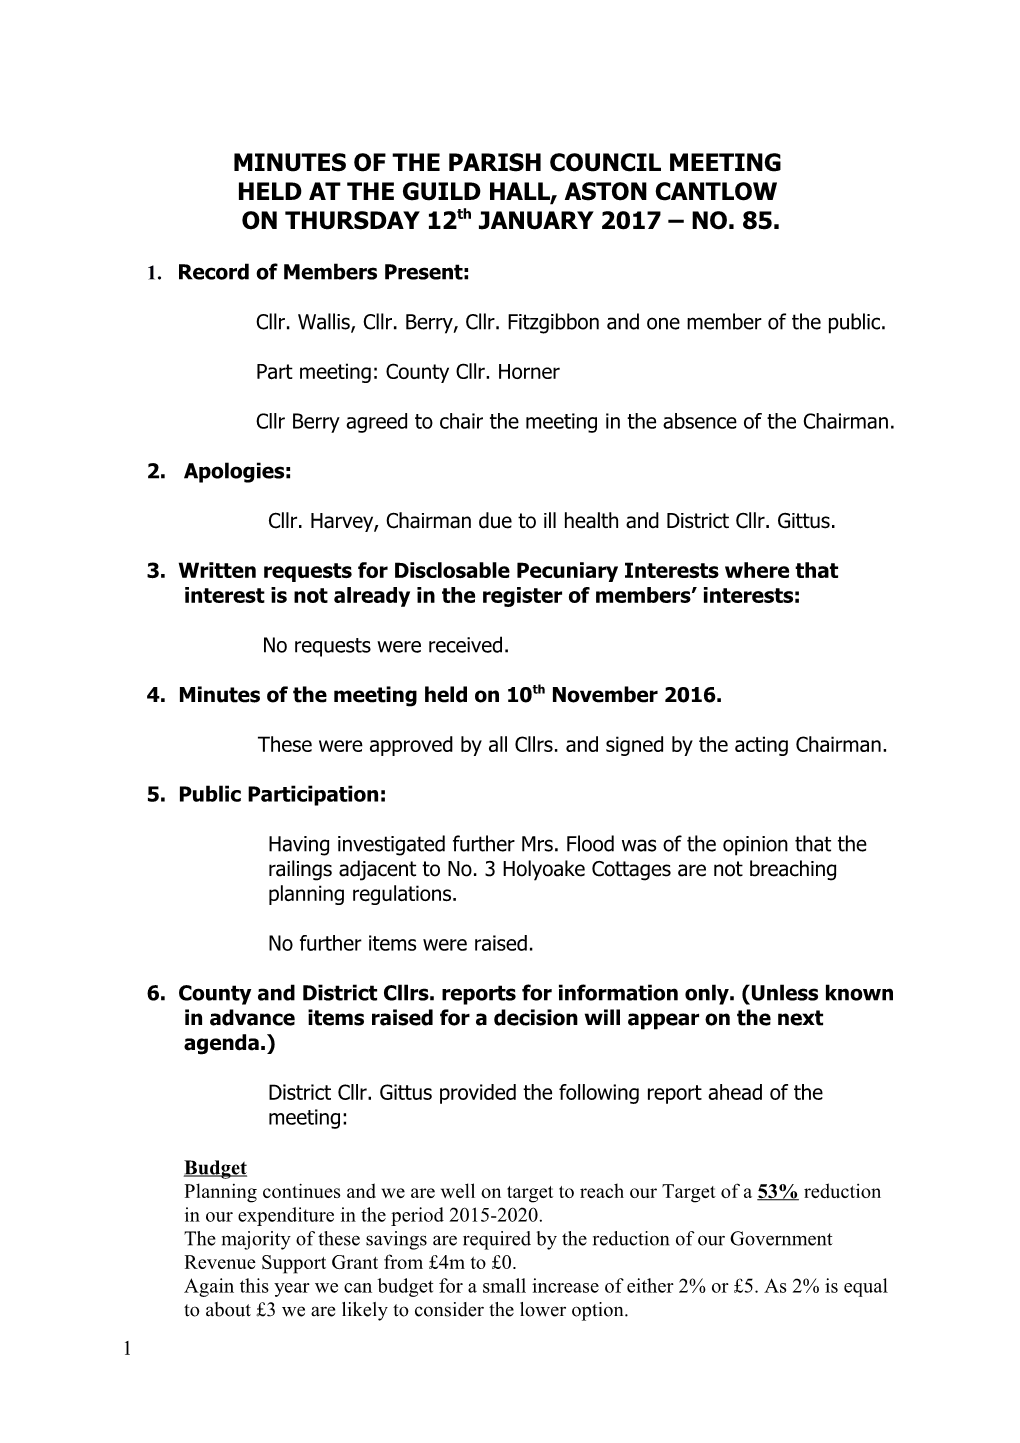 Minutes of the Parish Council Meeting s7